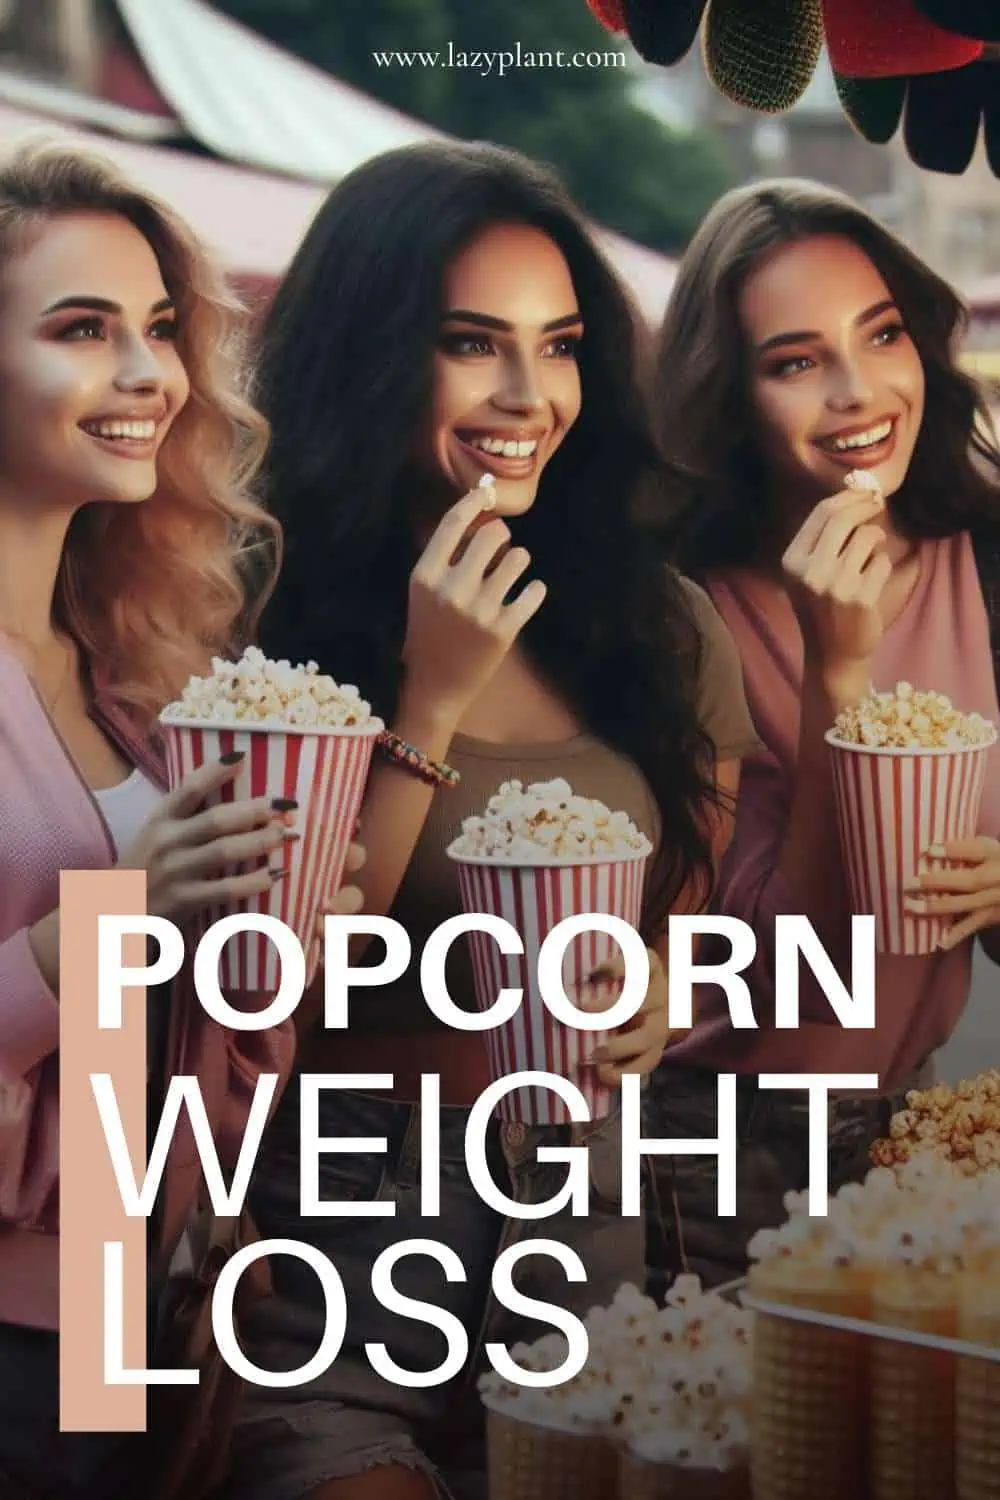 Can popcorn make you fat?